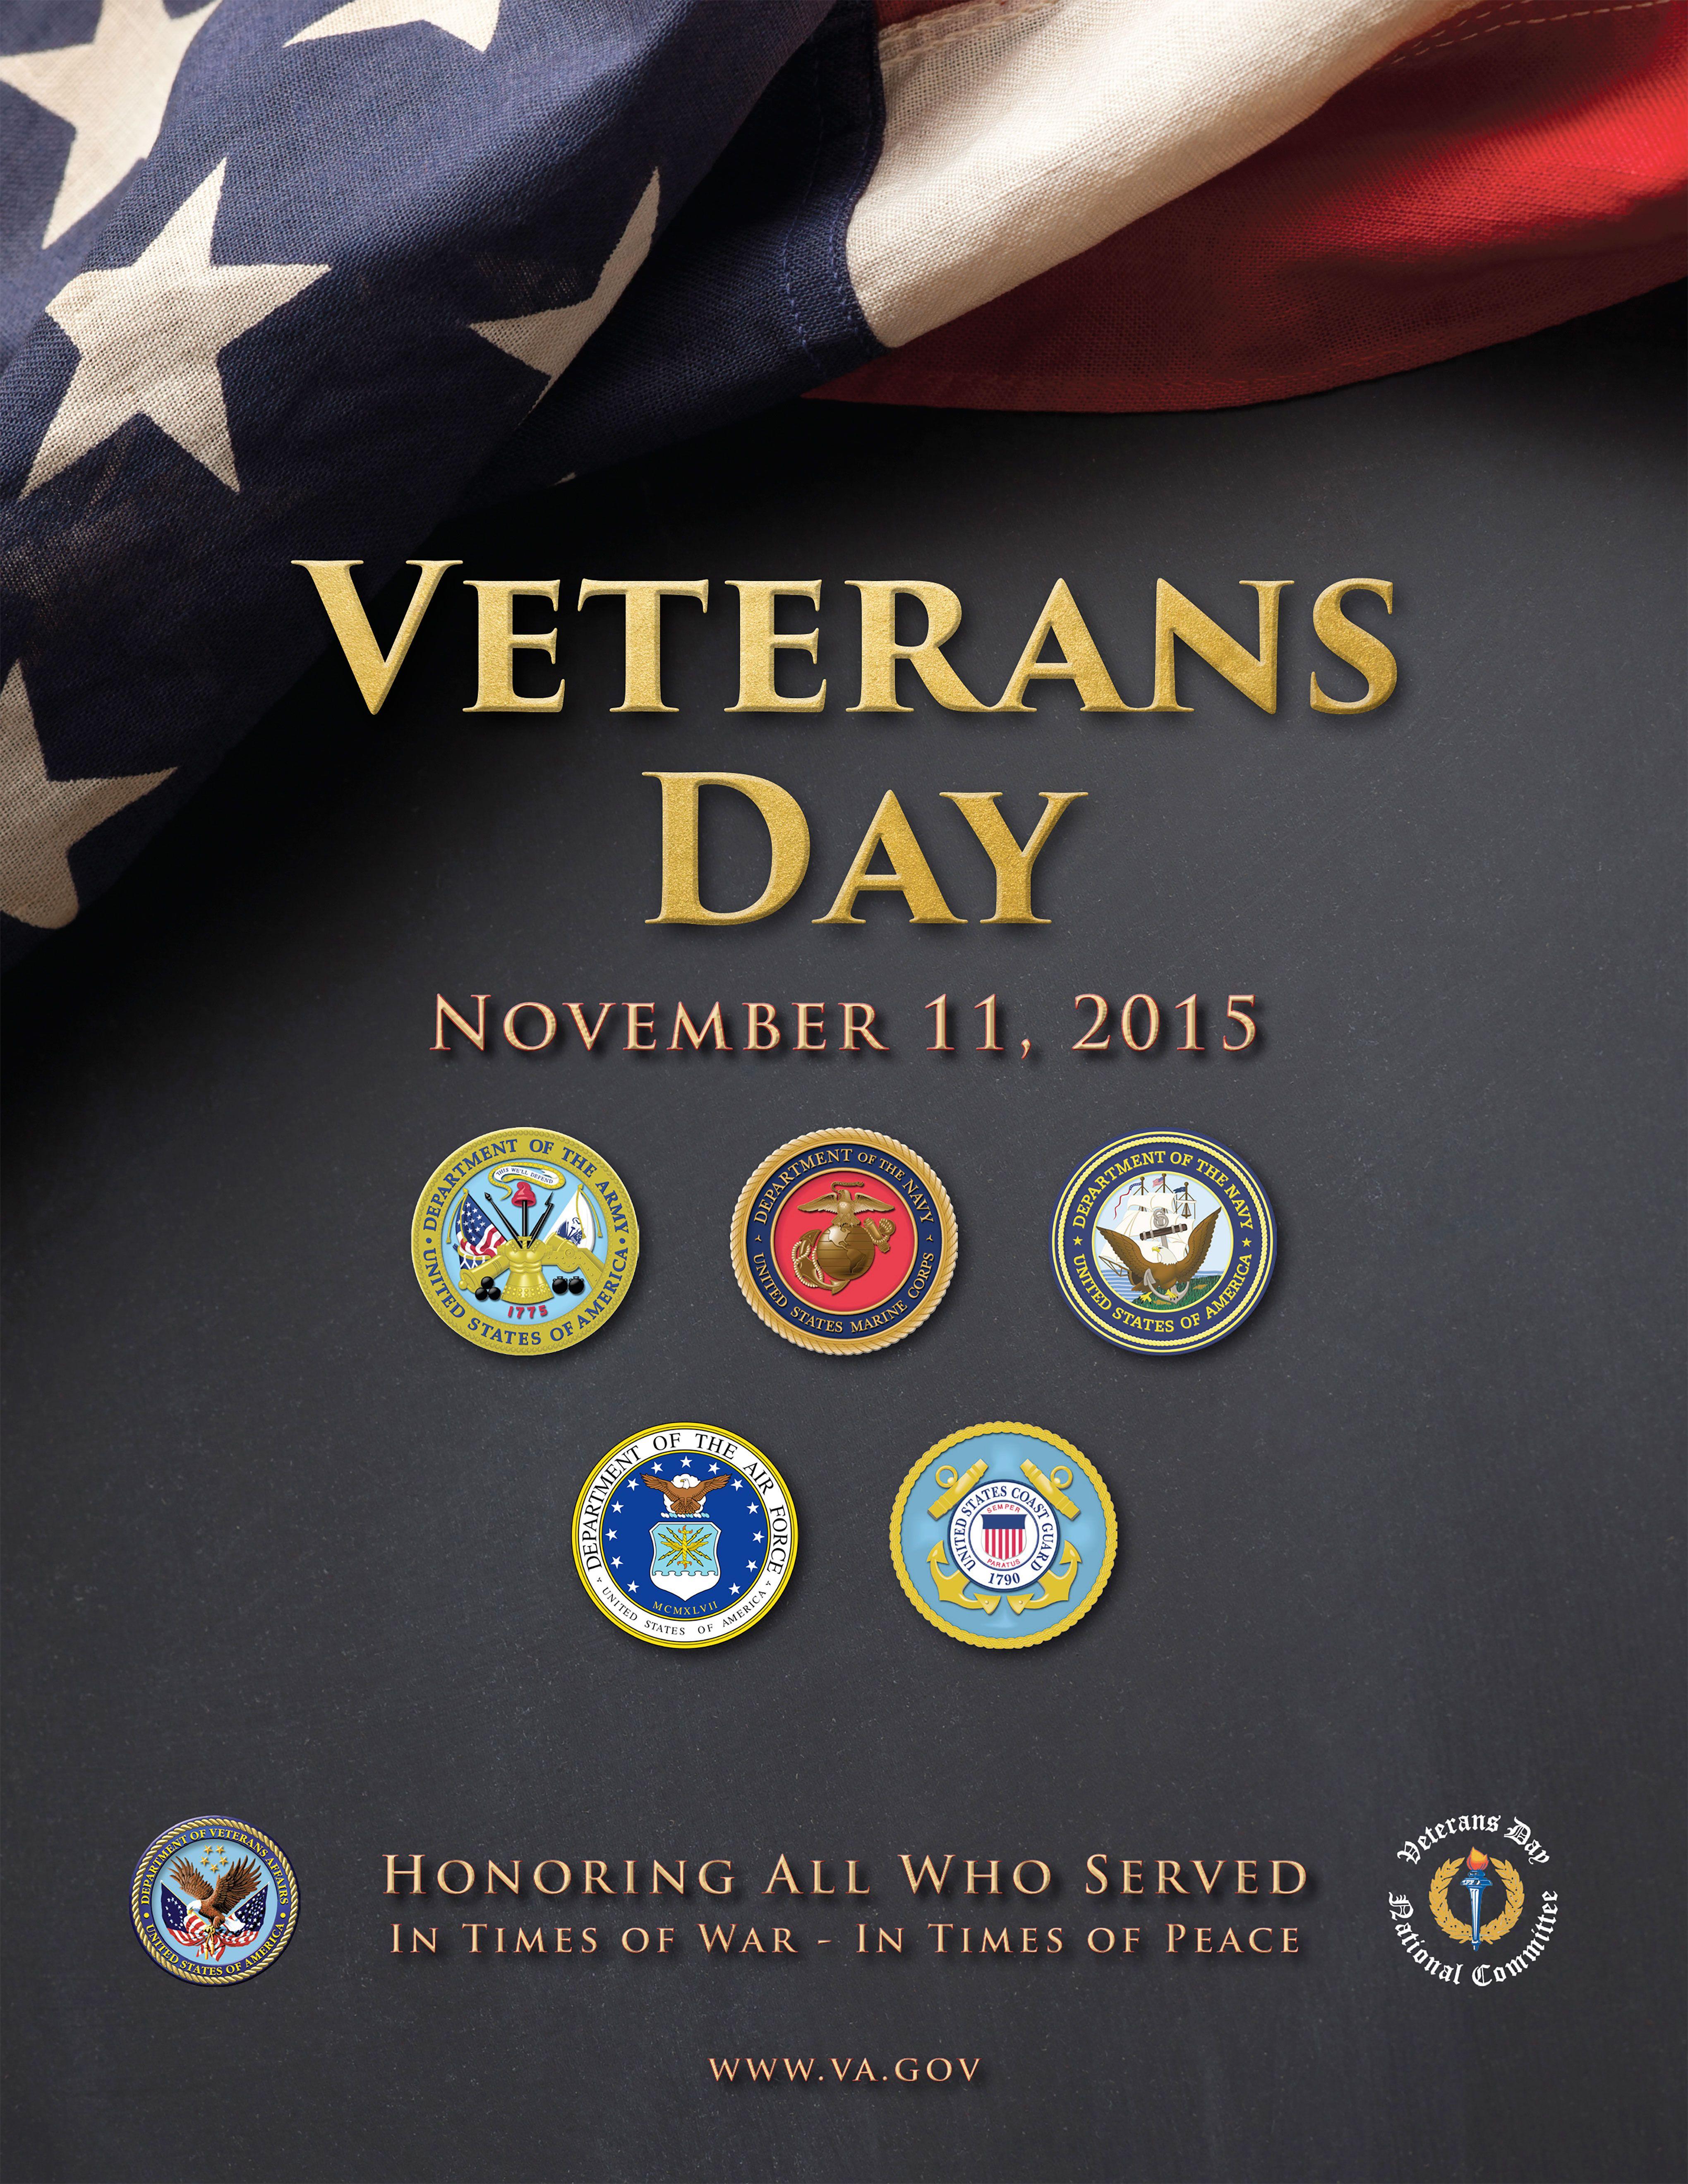 Veterans Day Poster Gallery of Public